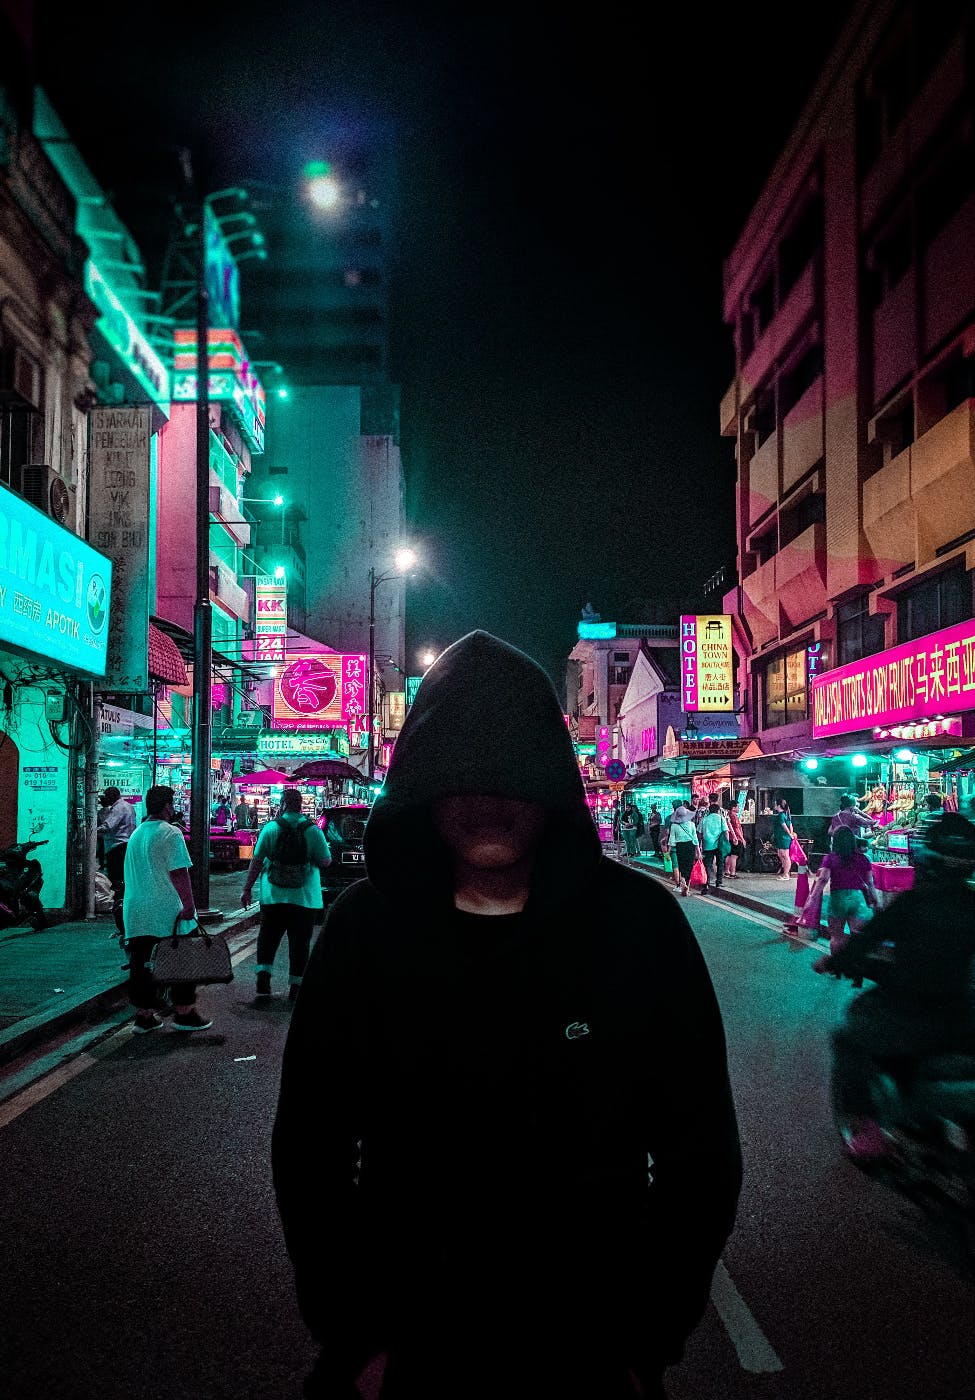 A hooded figure walking a busy street at night